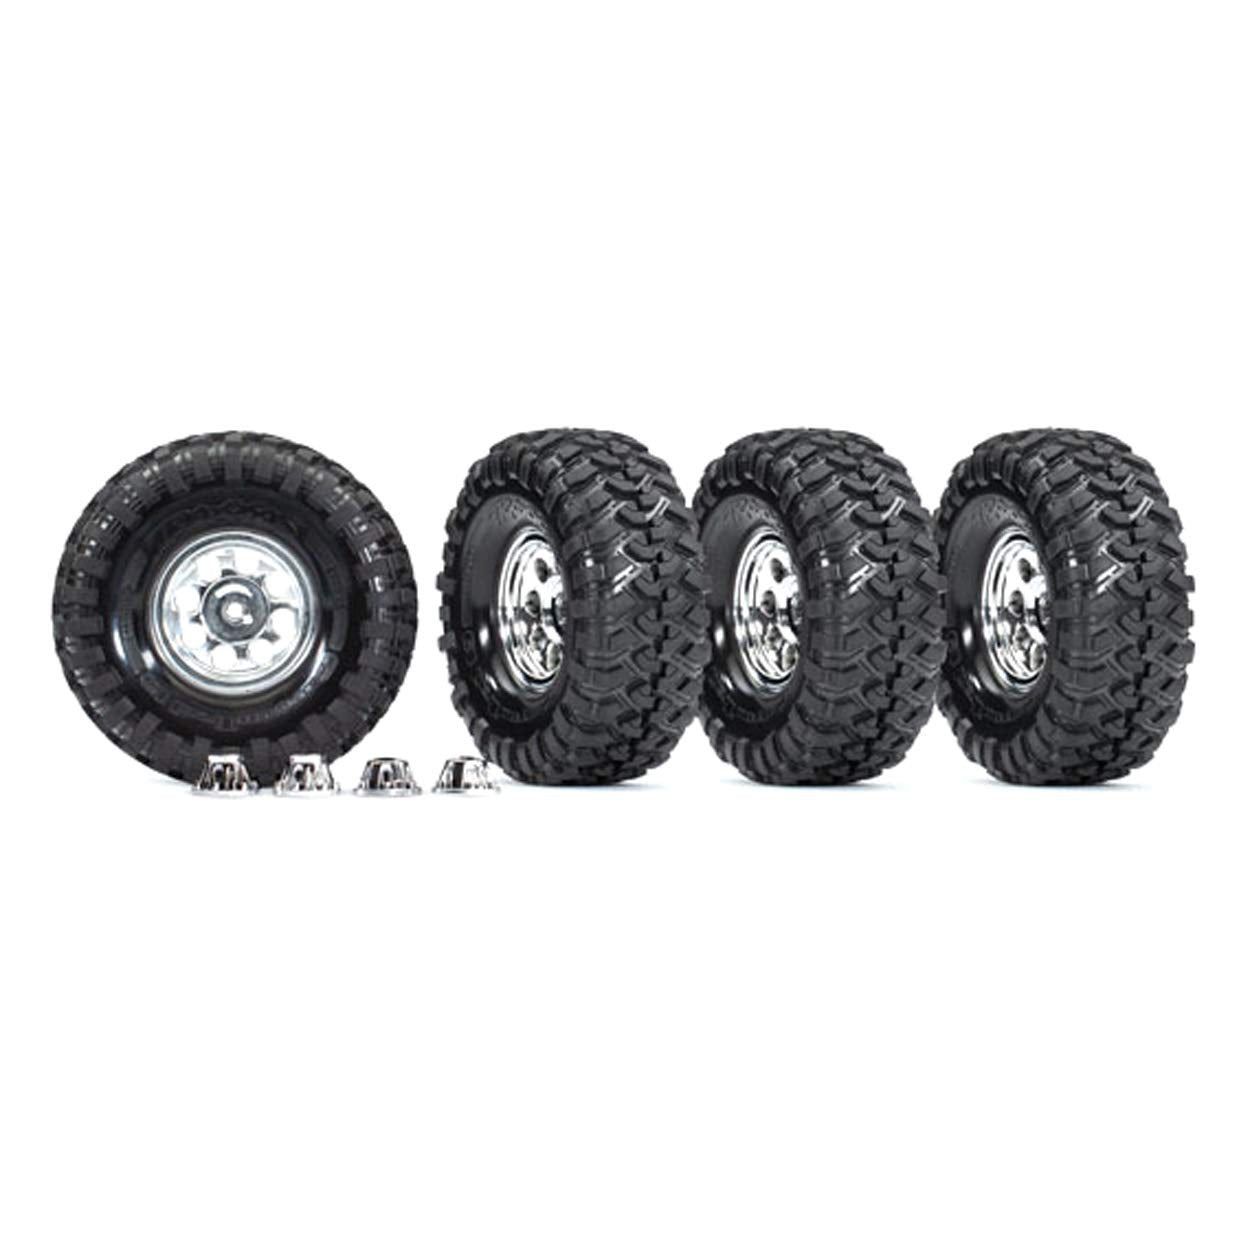 TRAXXAS 8183X Canyon Tires Mounted on 1.9" 8 Hole Chrome Mag Wheels 4 Pack Blazer